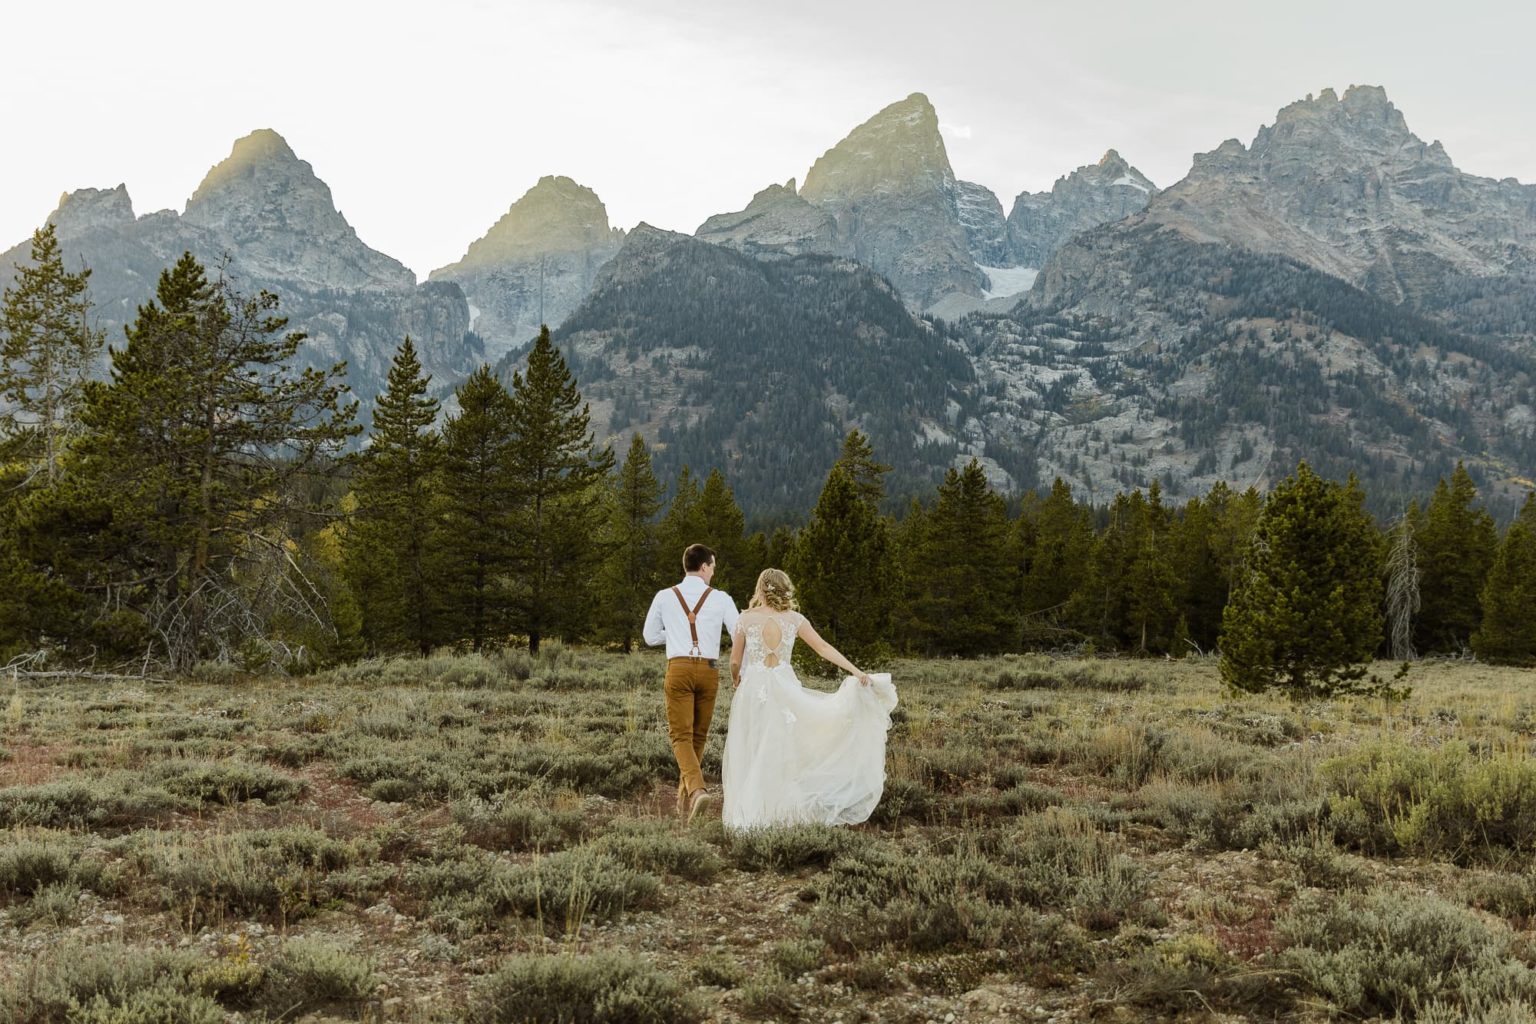 The Top 10 Wedding Venues in Jackson Hole, Wyoming